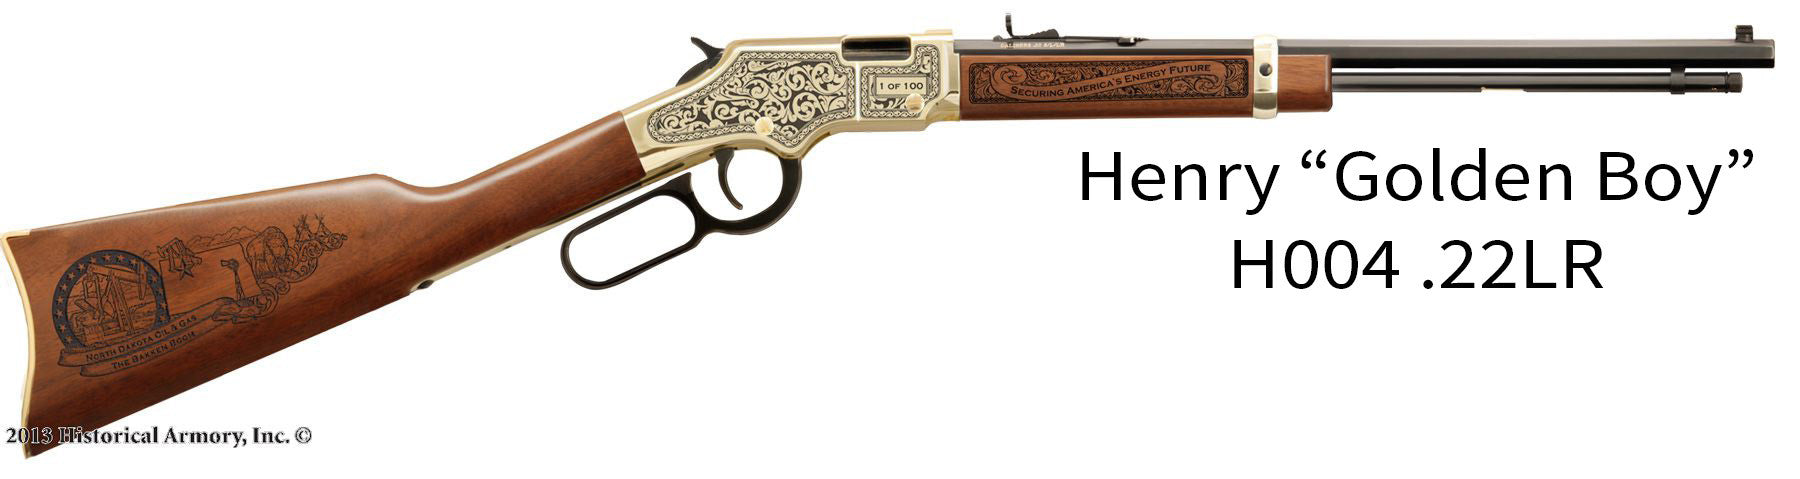 North Dakota State Oil & Gas Limited Edition Engraved Henry Rifle